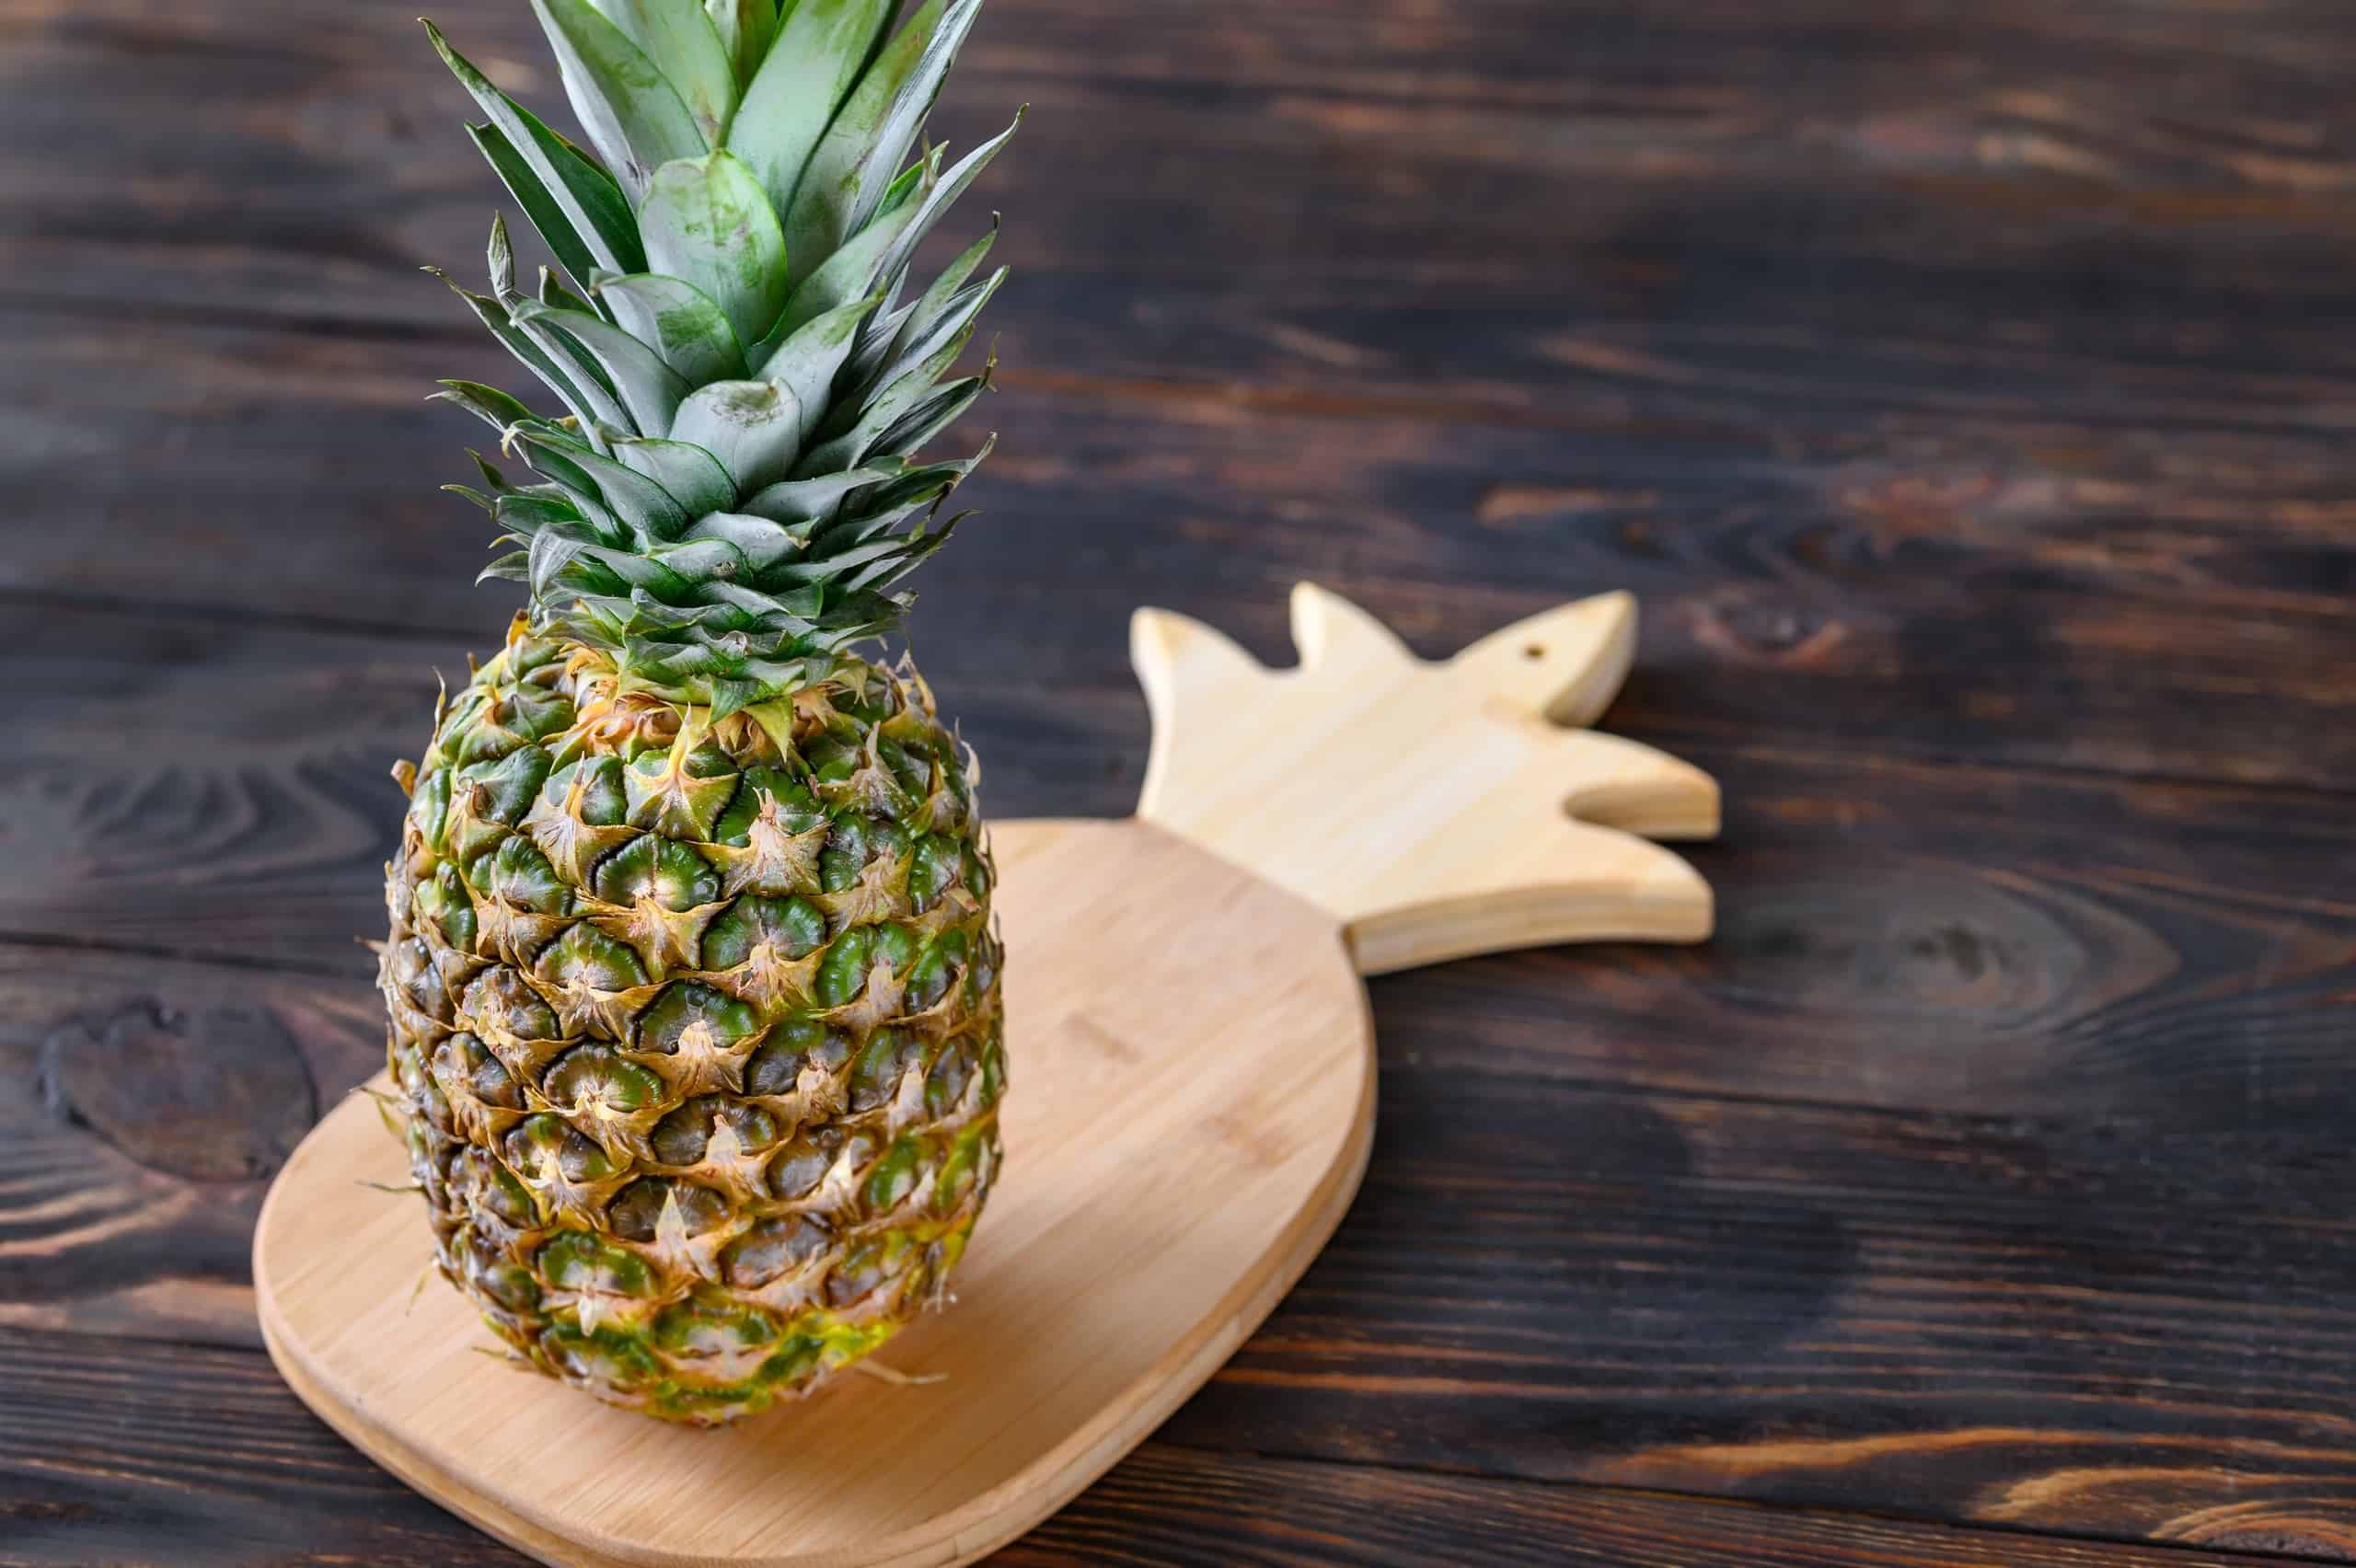 Bromelain: A Pineapple Extract for Back Pain Relief